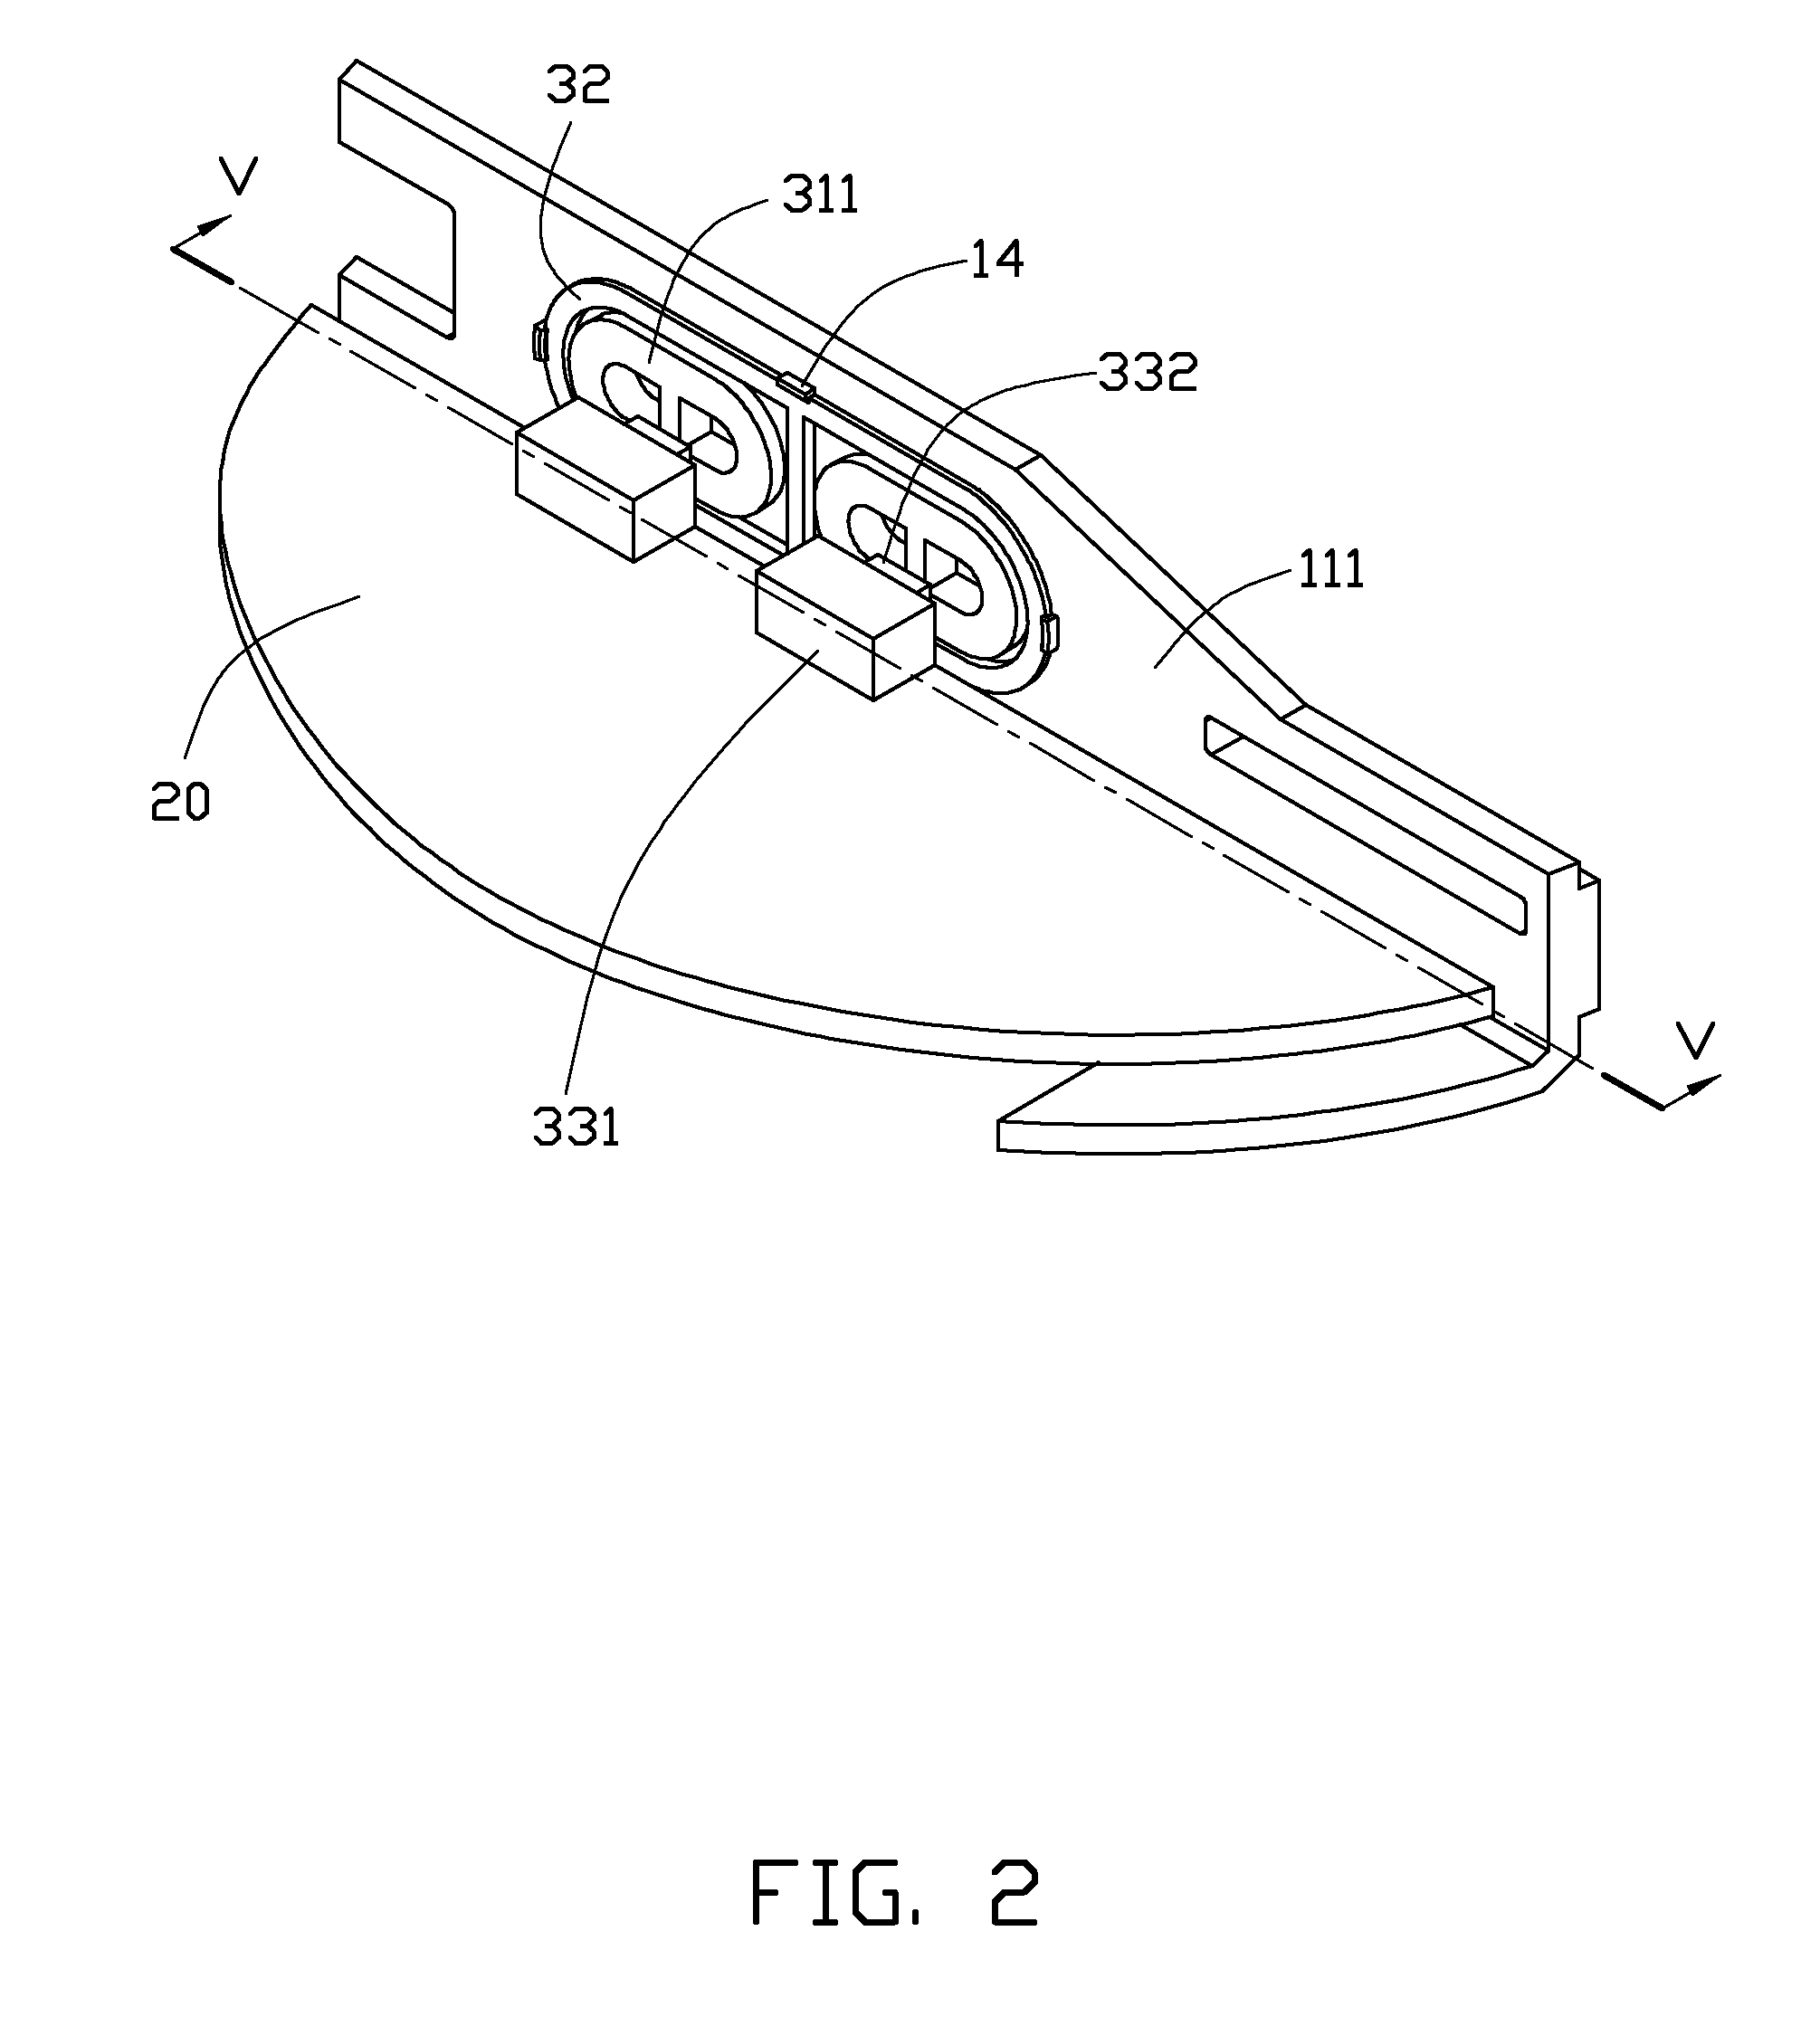 Waterproof button and electronic device using the same